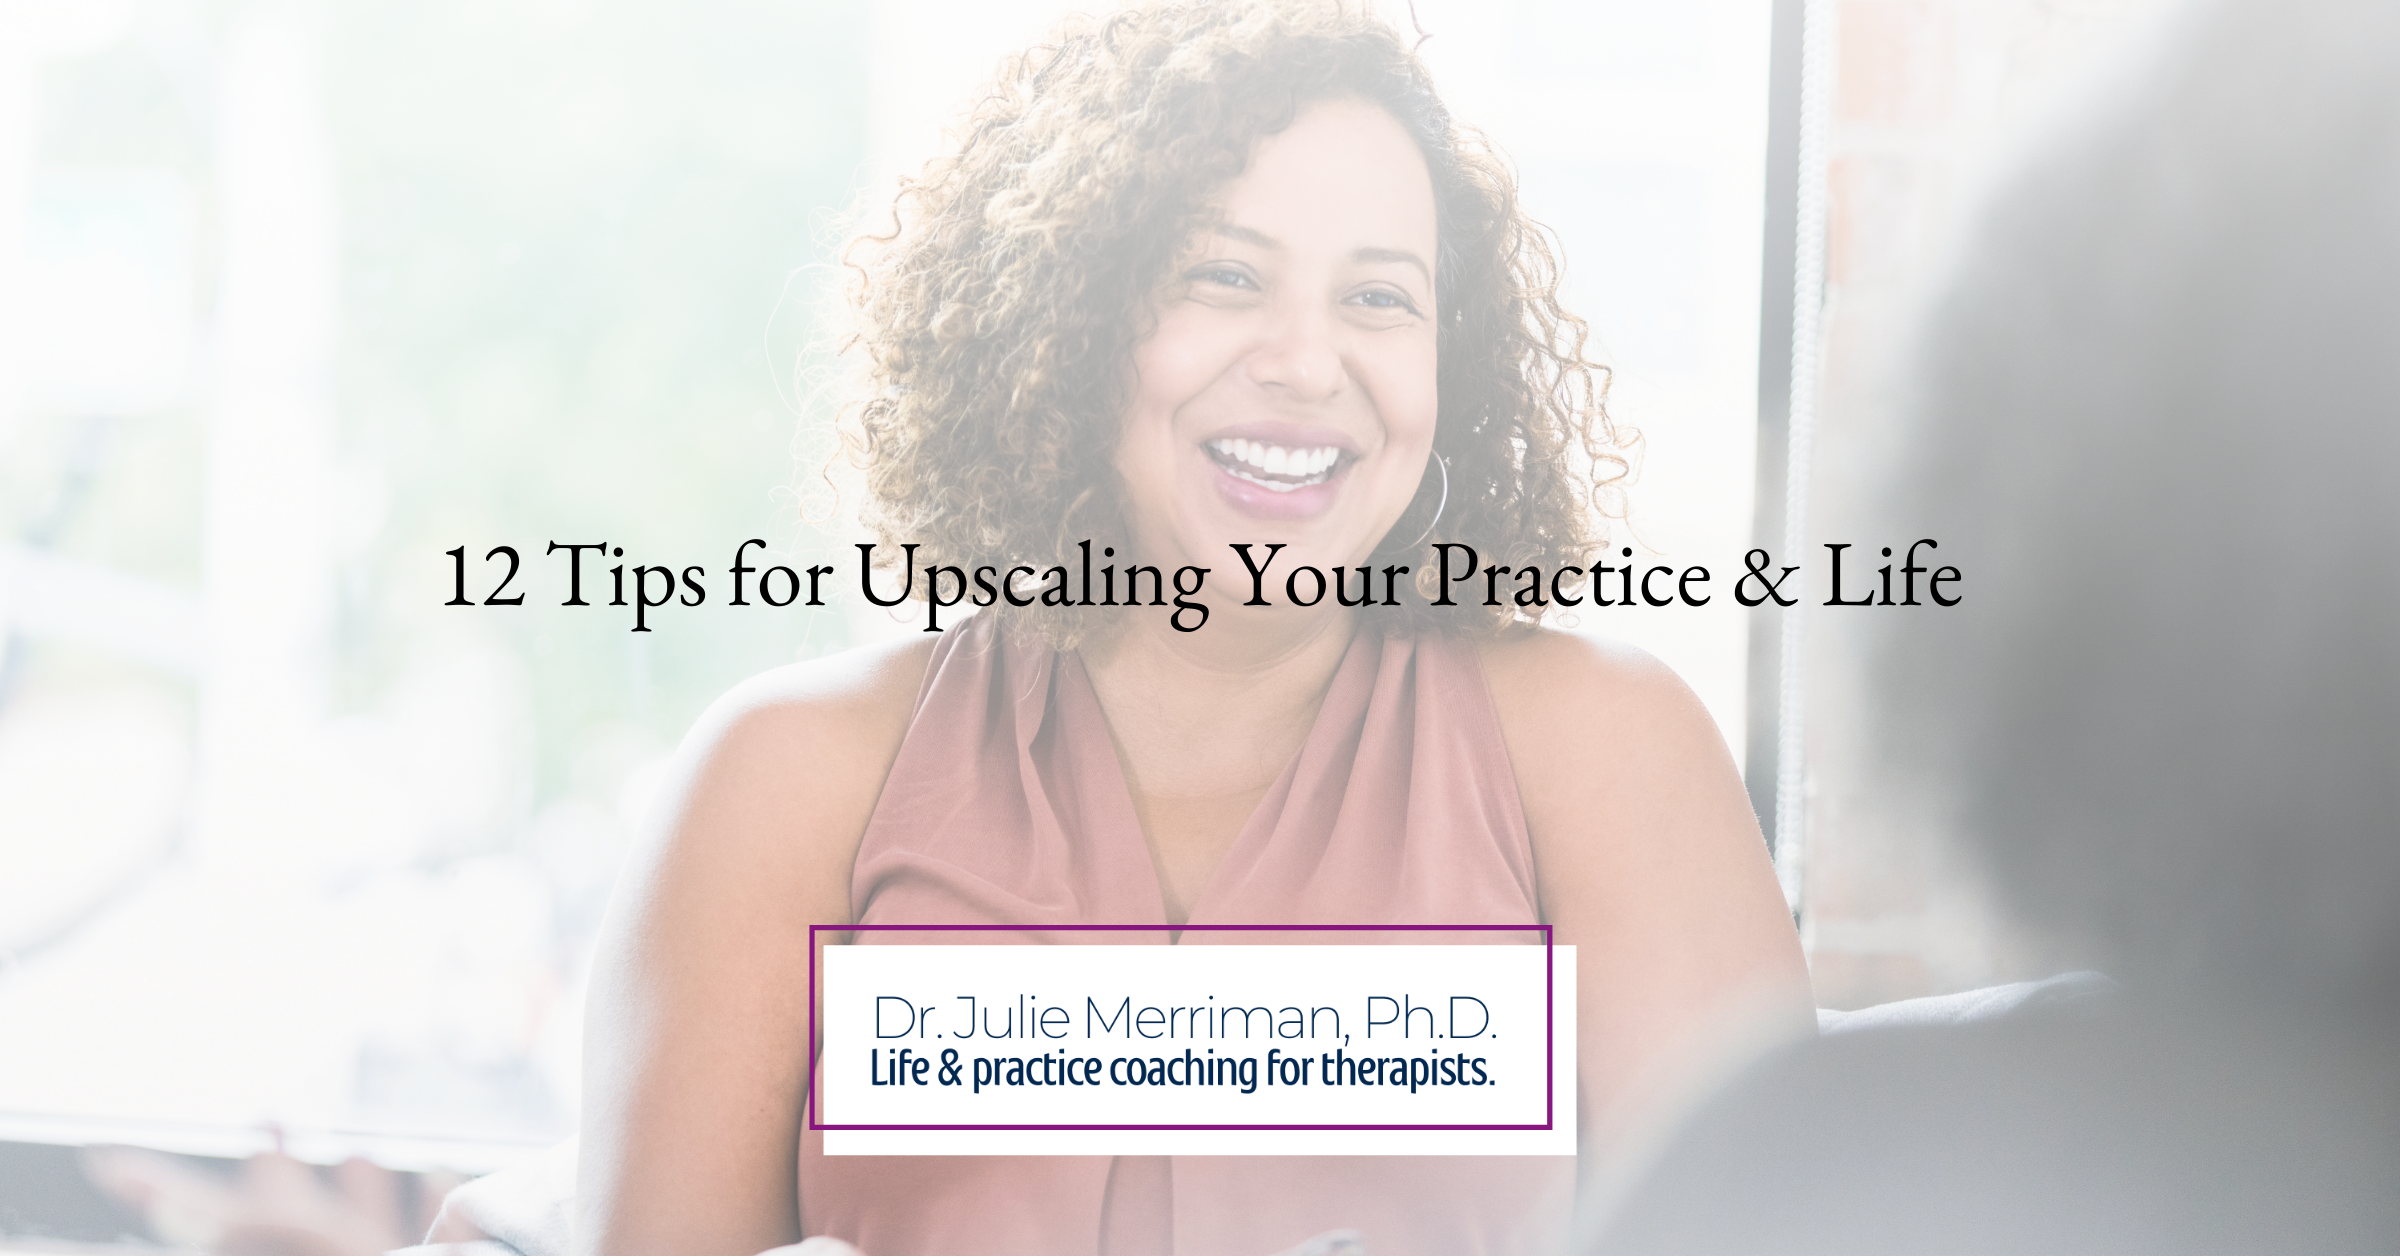 12 Tips for Upscaling Your Practice & Life